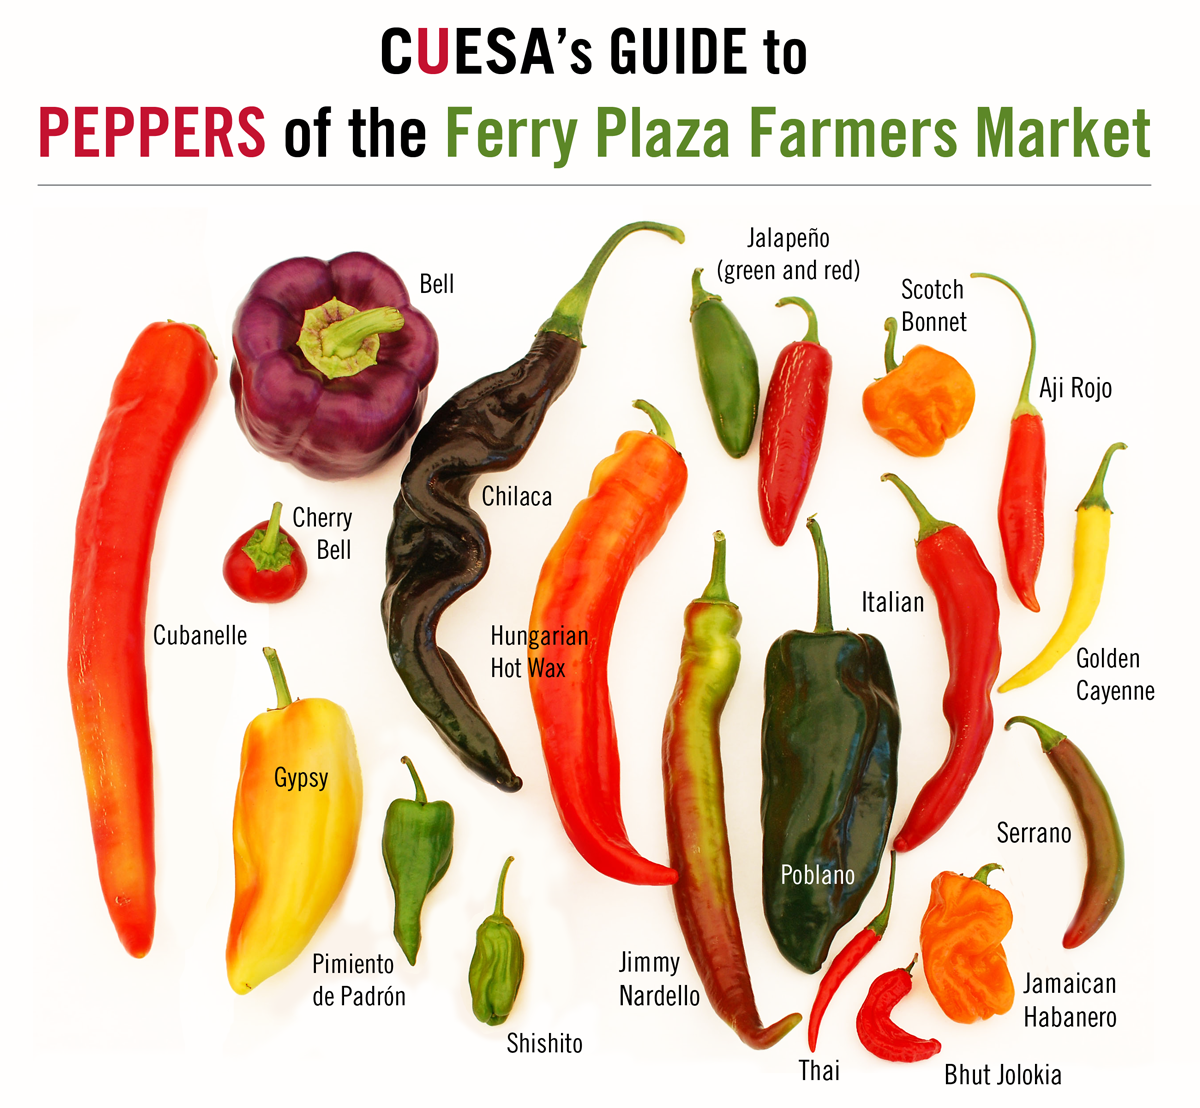 CUESA Guide to Peppers of the Ferry Plaza Farmers Market